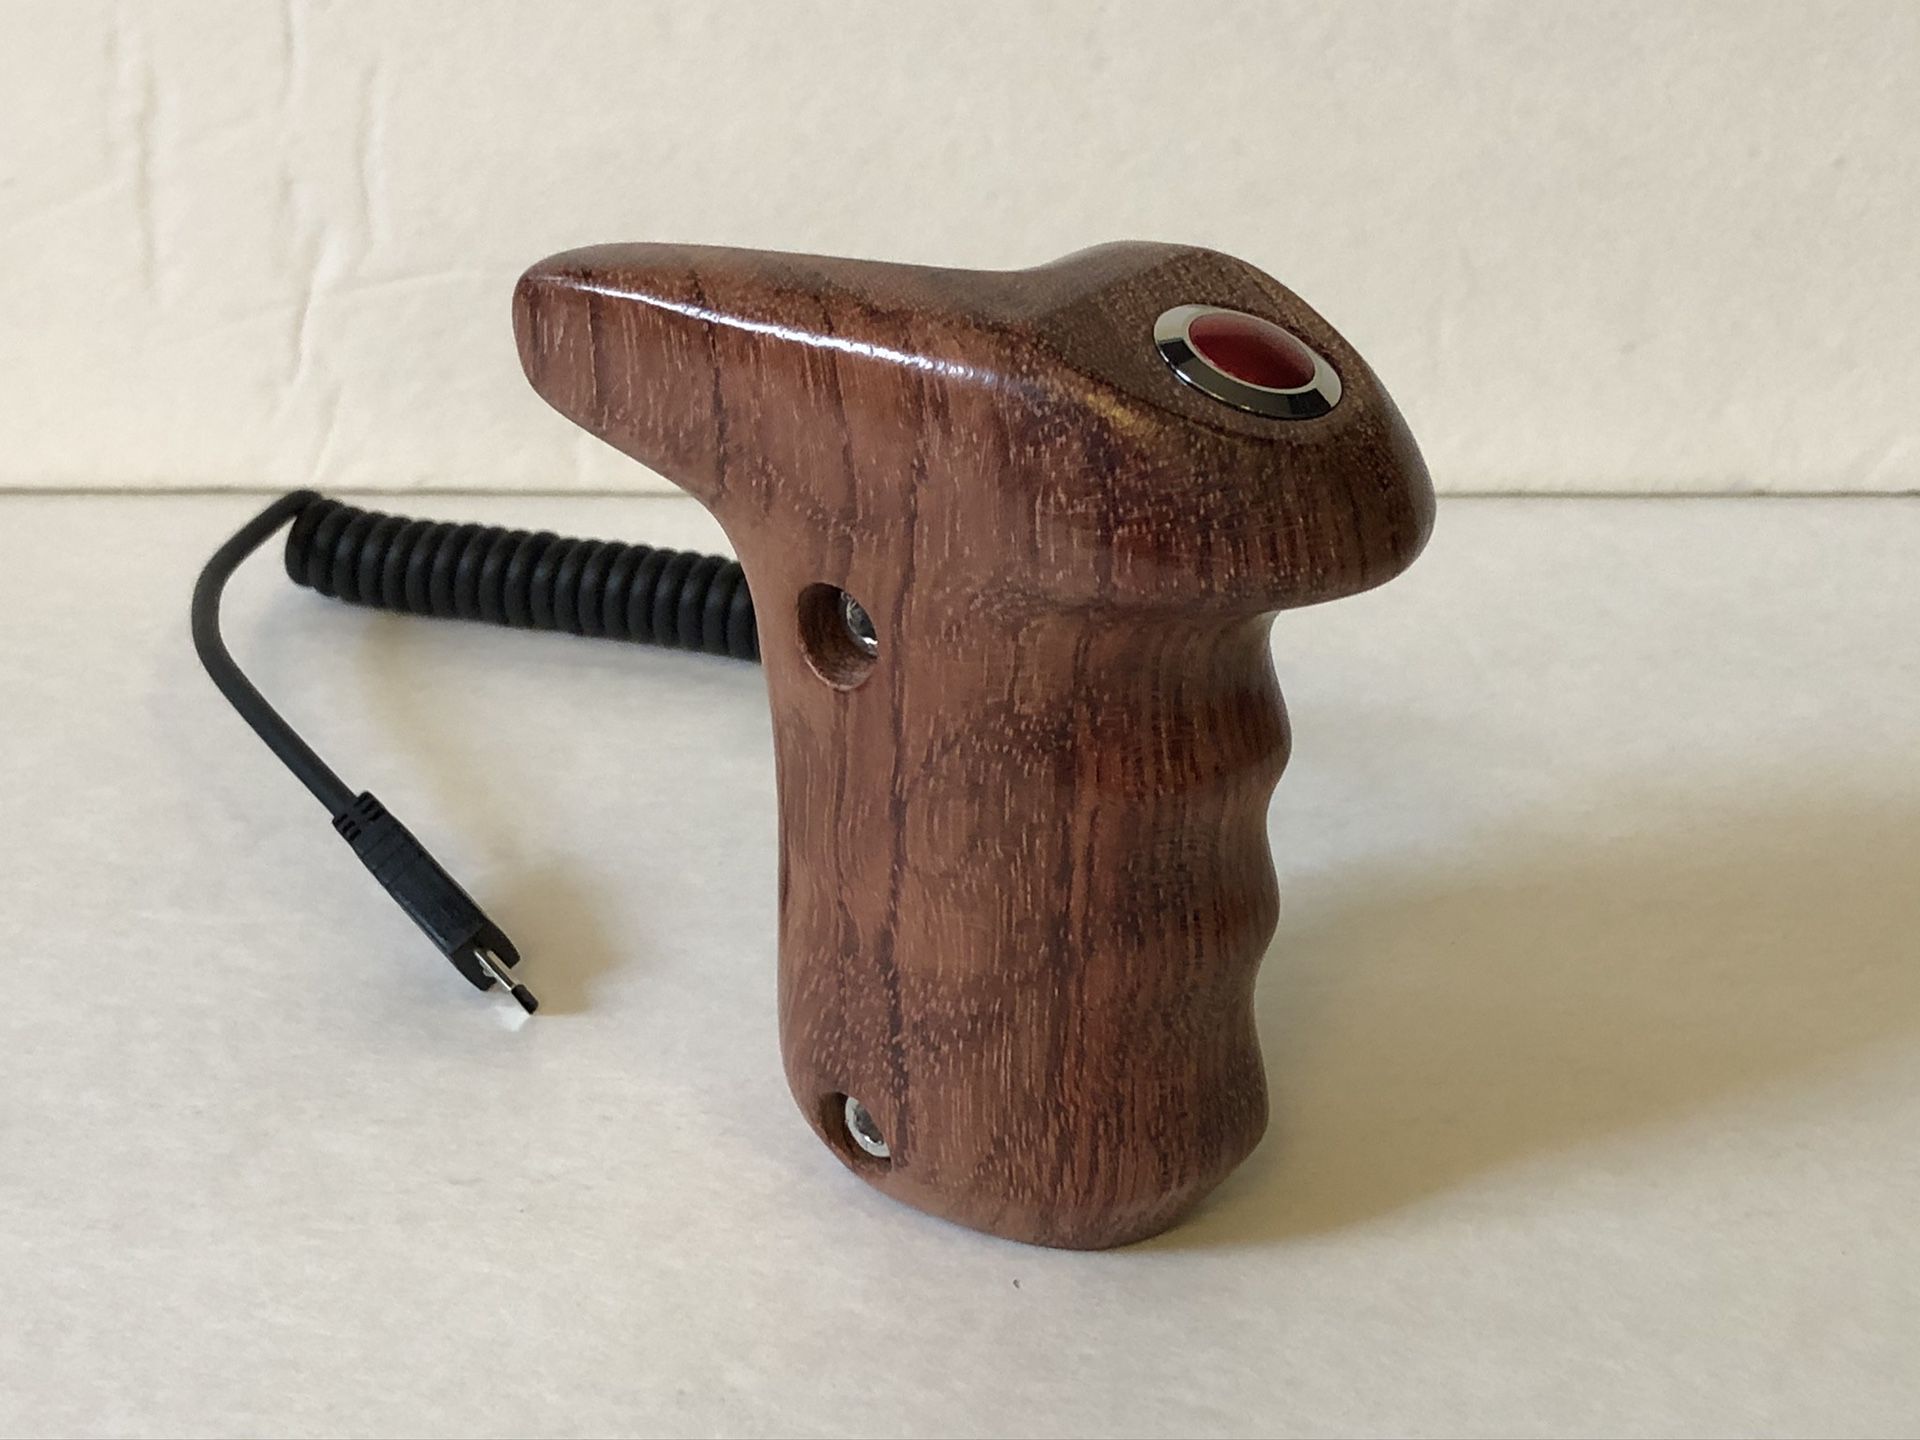 Sony SmallRig Right Side Wooden Handle w/Record Start/Stop